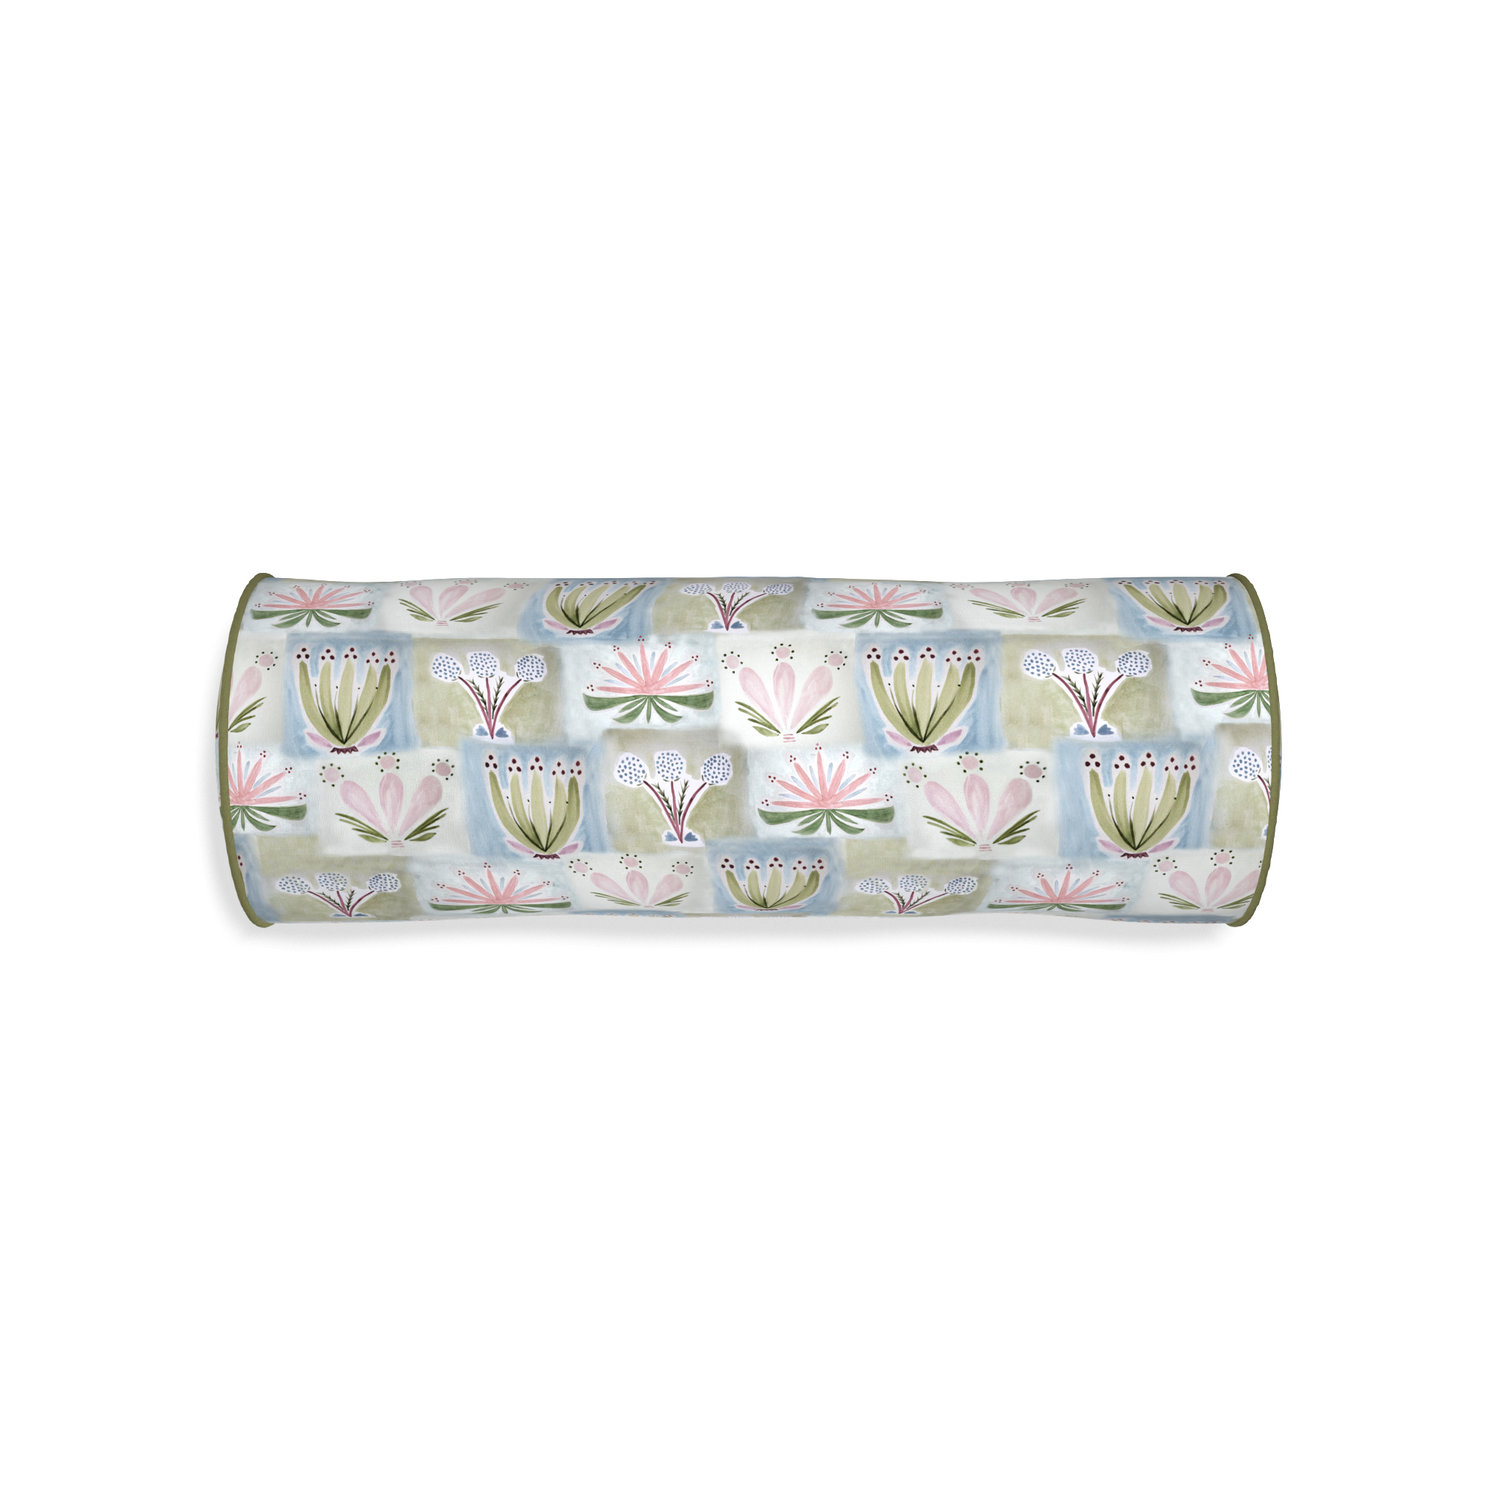 Bolster harper custom pillow with moss piping on white background